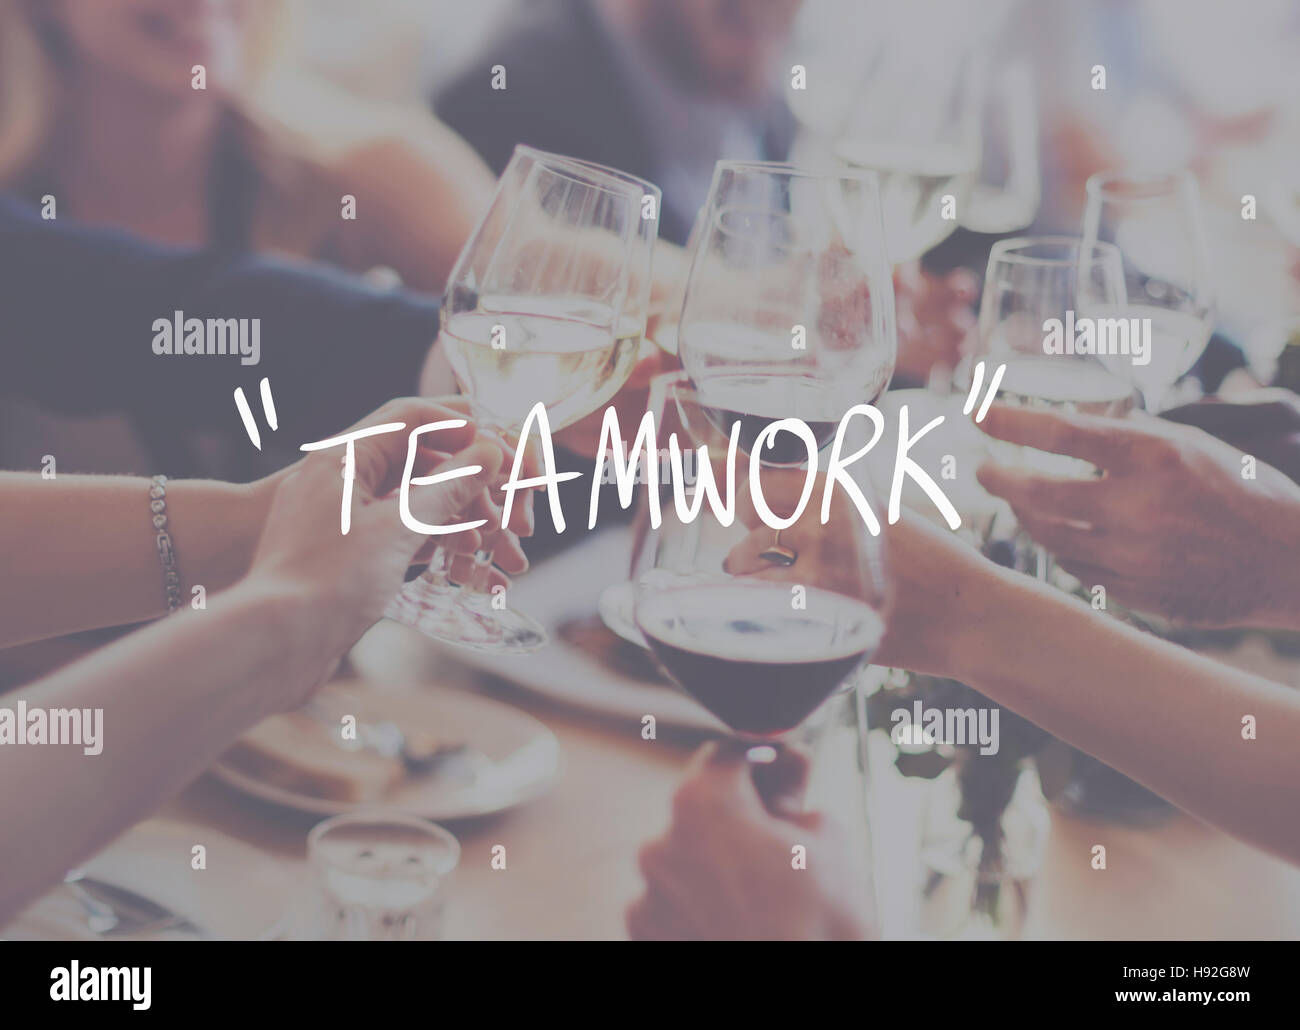 Stand Together Strong Teamwork Cooperation Concept Stock Photo